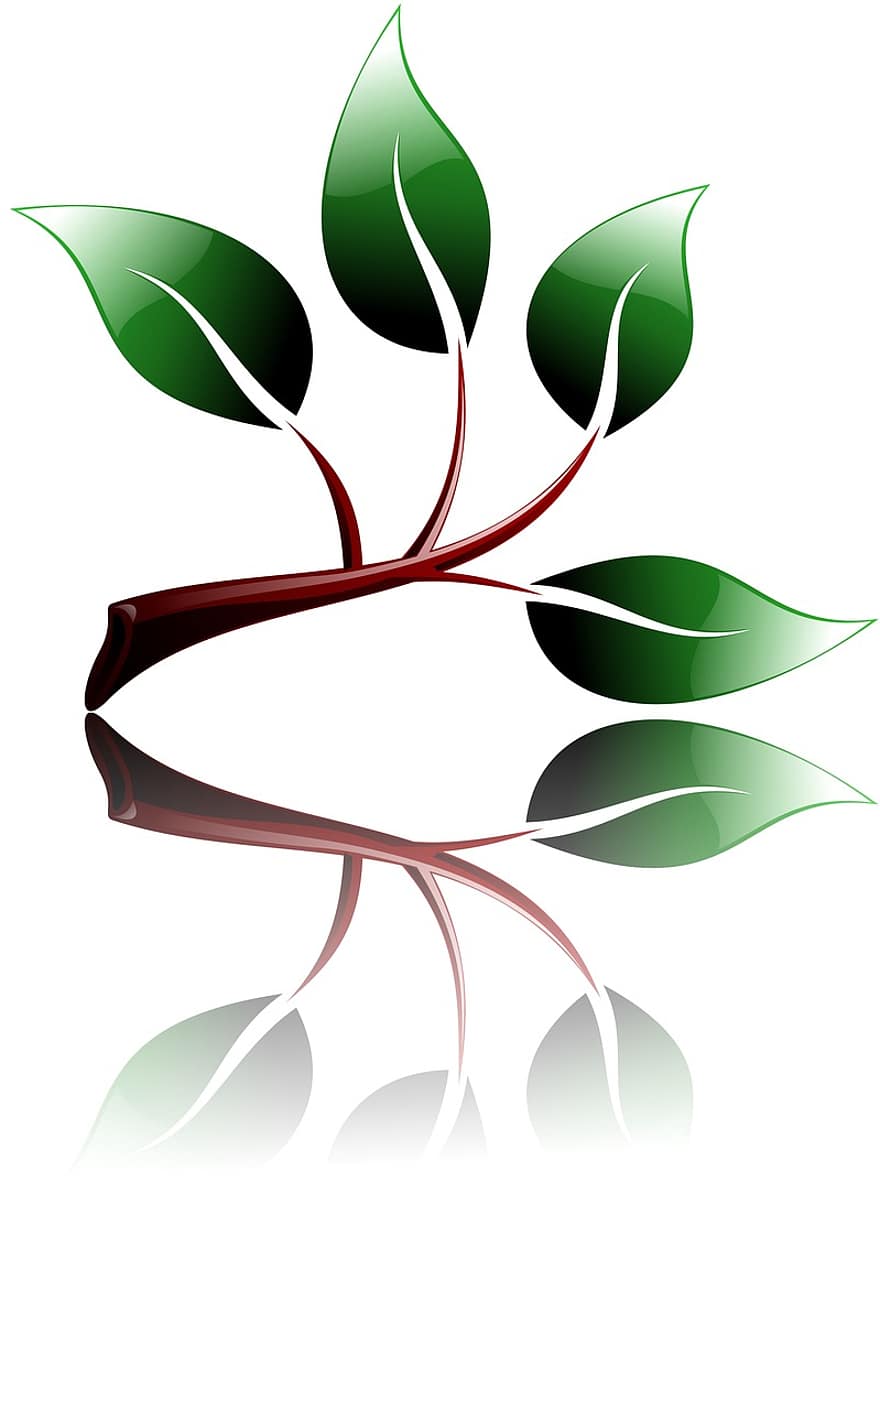 Branch, Ecological, Environment, Green, Grow, Isolated, Leaf, Nature, Plant, Sprout, Symbol